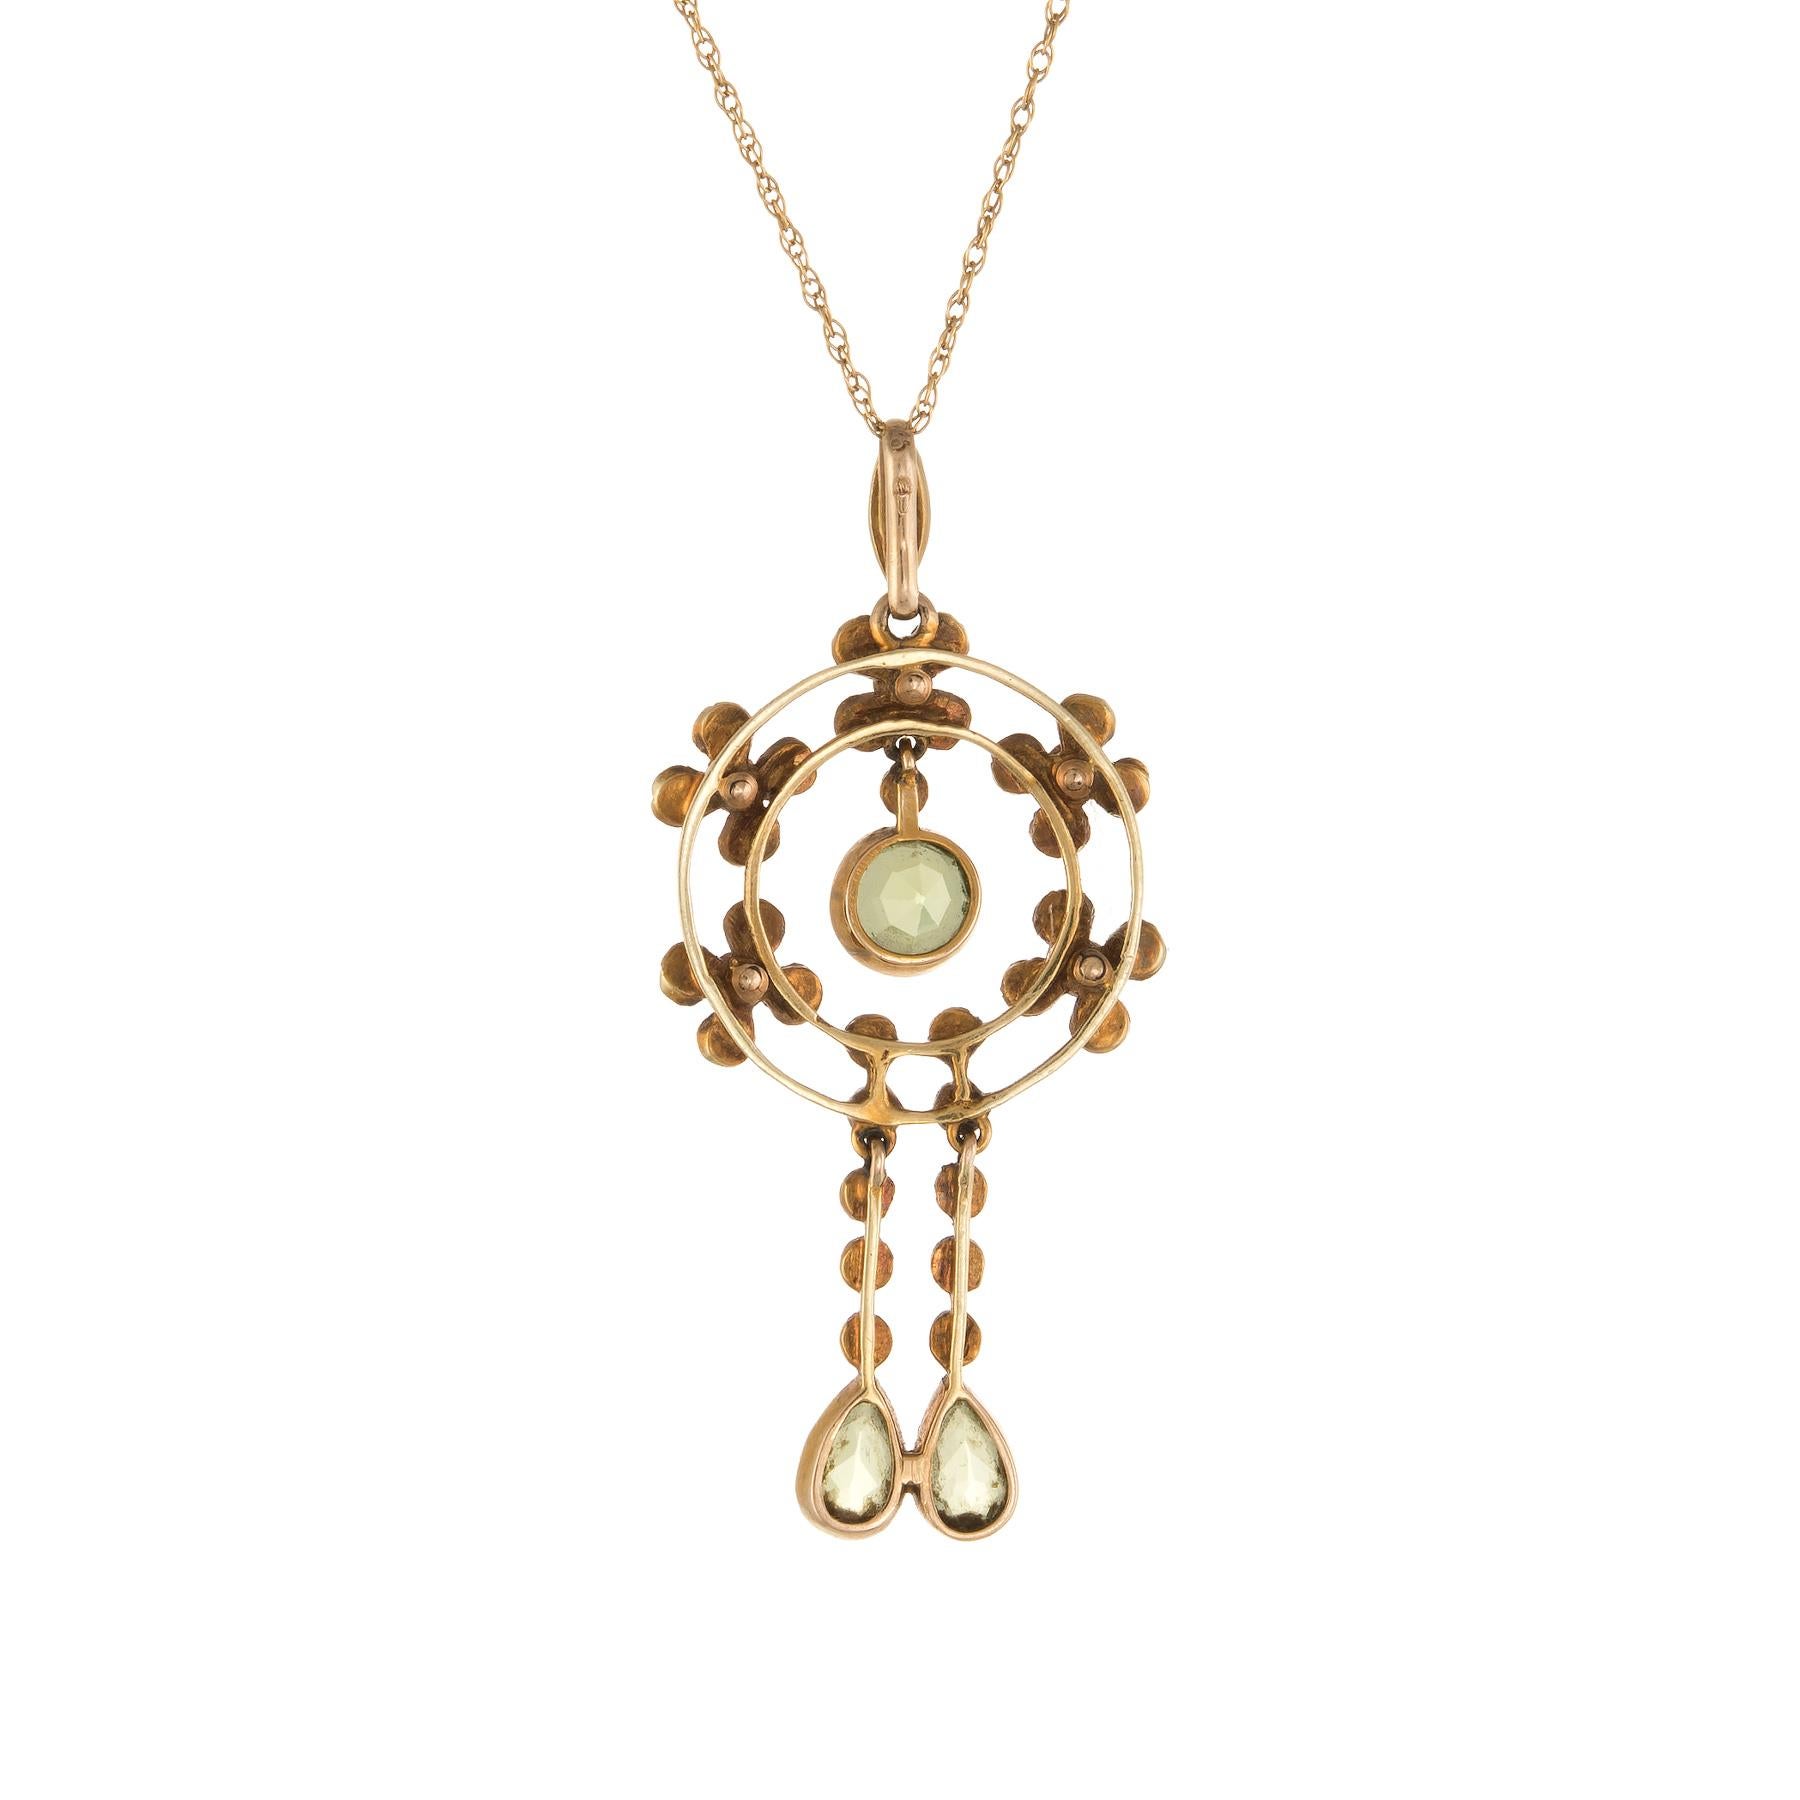 Finely detailed Edwardian era necklace (circa 1910s), crafted in 15 karat yellow gold with a 14 kart yellow gold chain.

Faceted round cut peridot (upper) is estimated at 0.60 carats, with two faceted pear cut peridot estimated at 0.50 carats each.